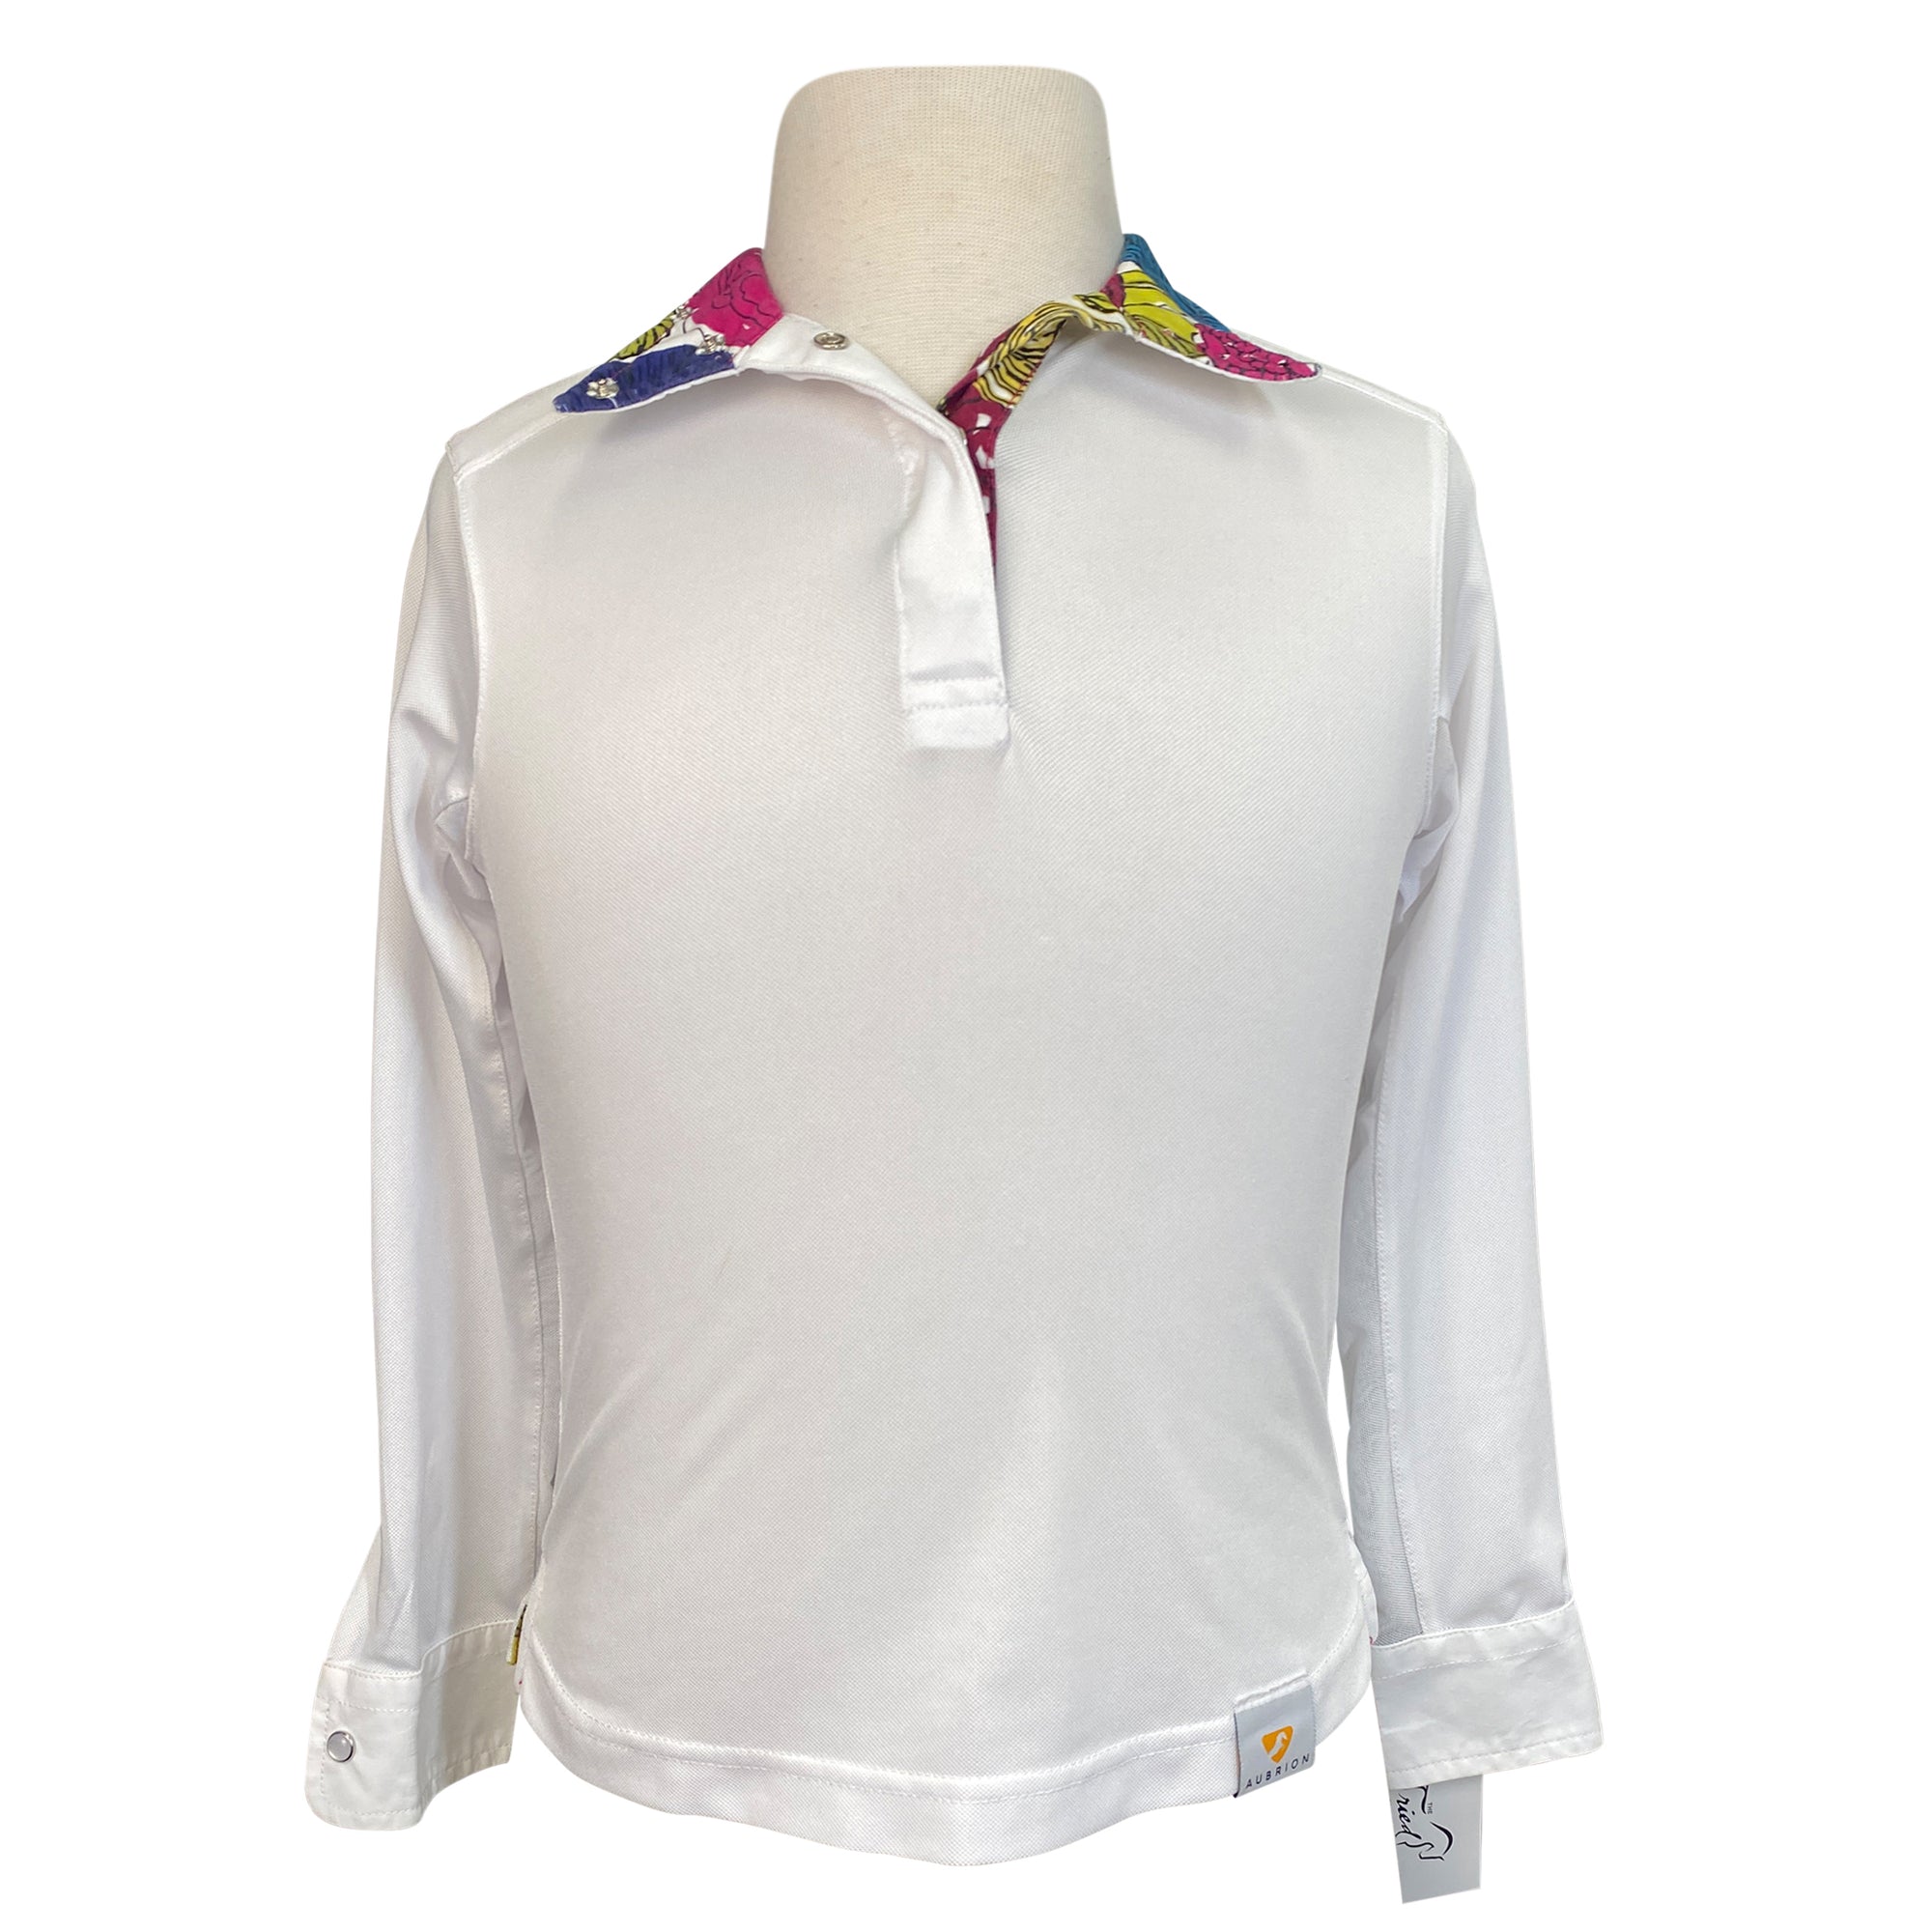 Shires Aubrion Show Shirt in White/Floral